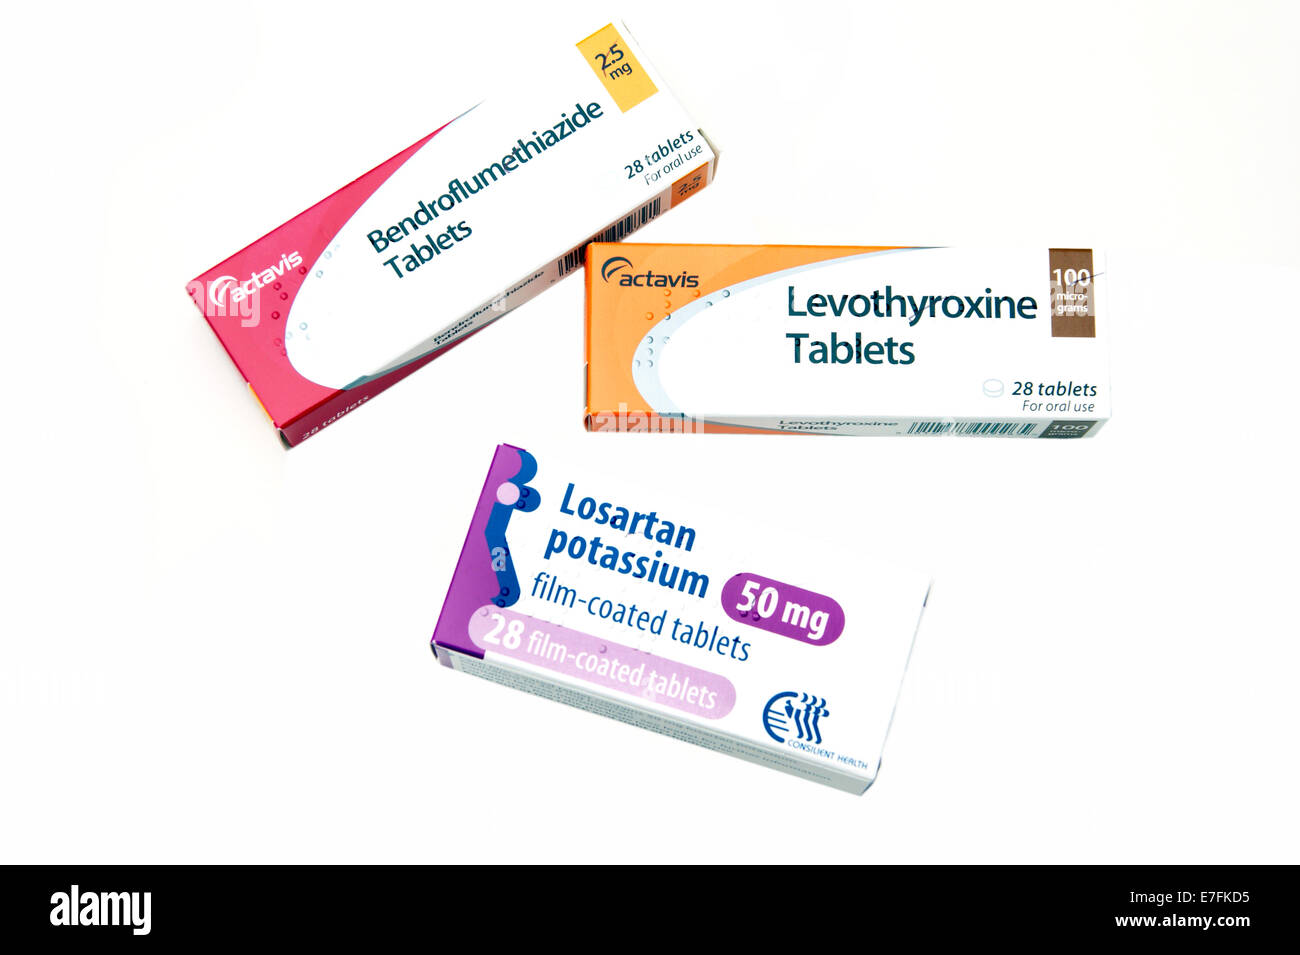 Boxes of mixed medication Bendroflumethiazide Levothyroxine & Losartan tablets for varying conditions Stock Photo